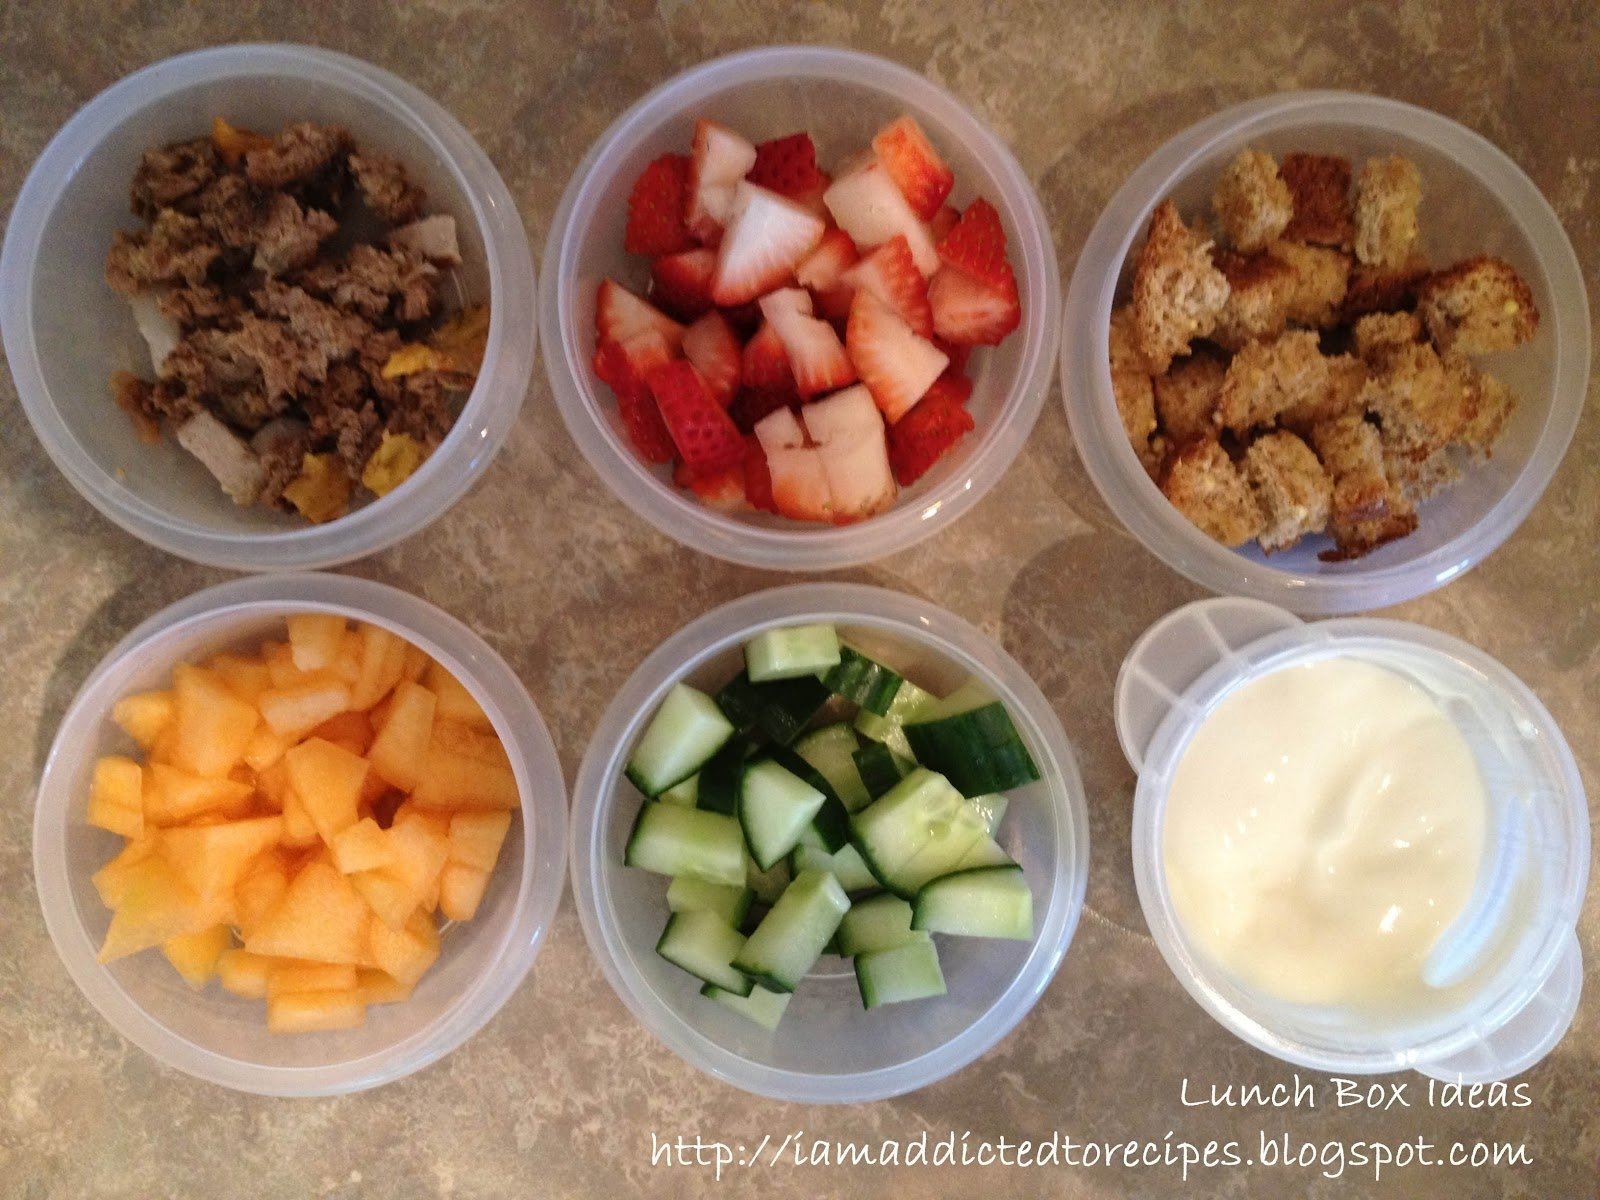 10 Awesome Snack Ideas For 1 Year Old 96 food ideas for 1 year olds a weeks worth of dinners for my 1 2022